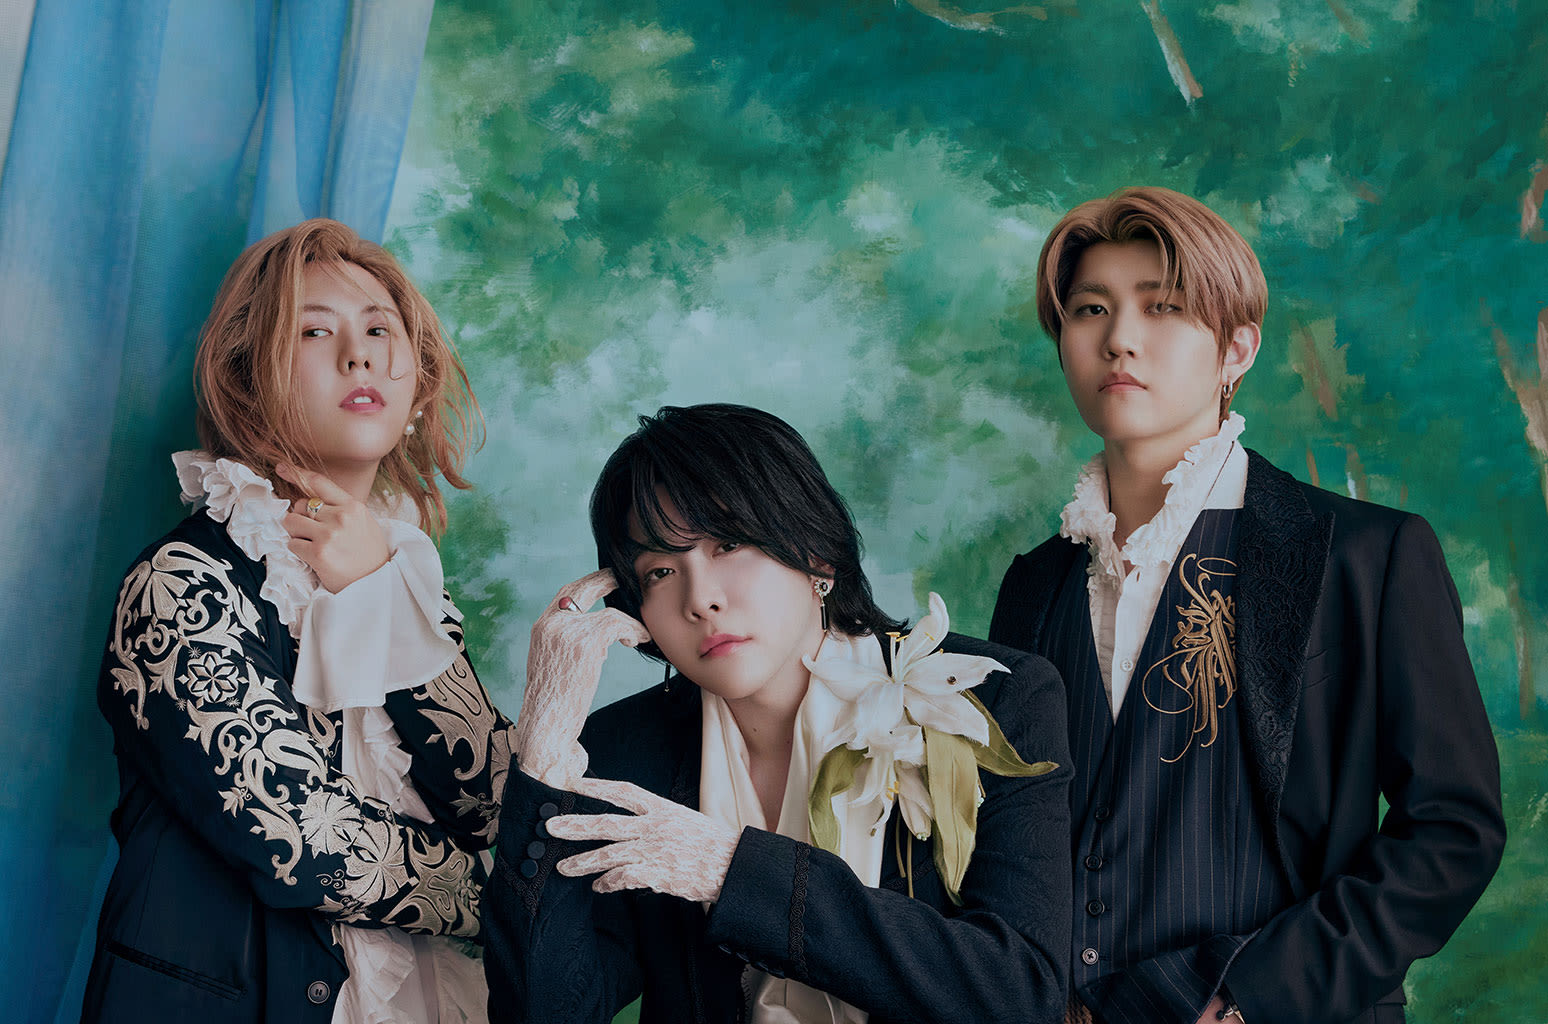 Mrs. GREEN APPLE’s ‘Lilac’ Reaches No. 1 After 14 Weeks on Japan Hot 100